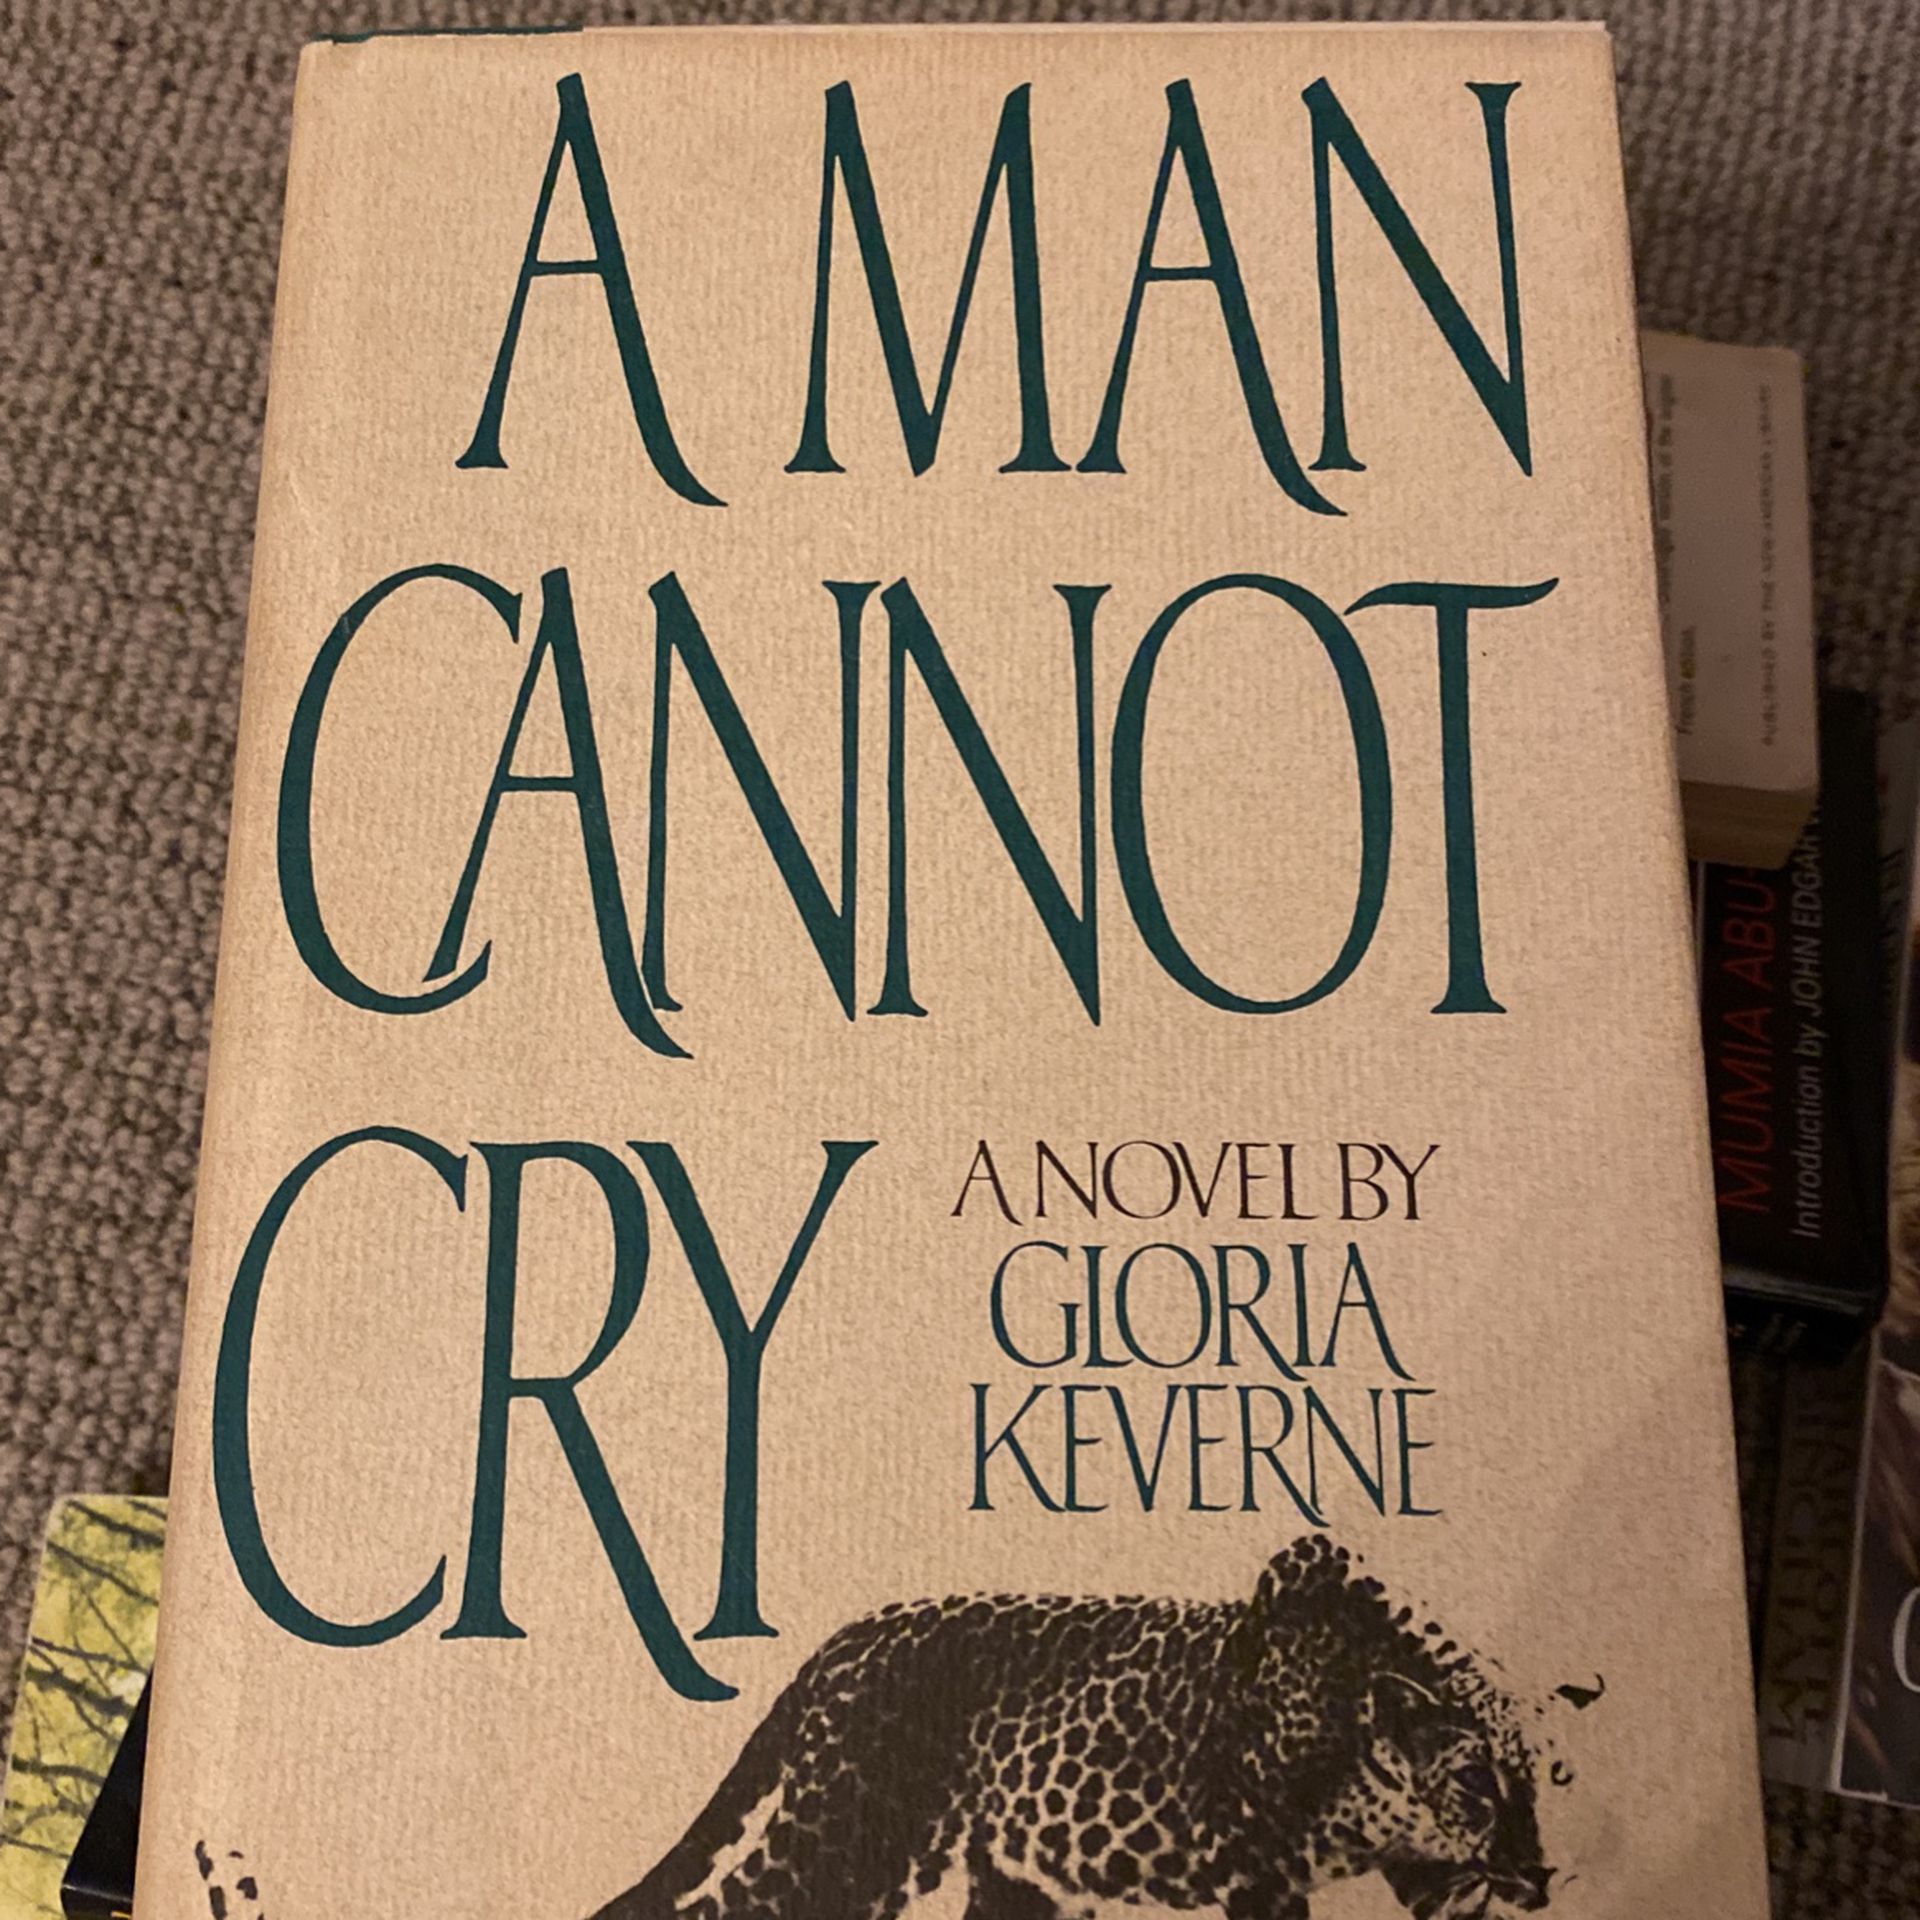 A Man Cannot Cry